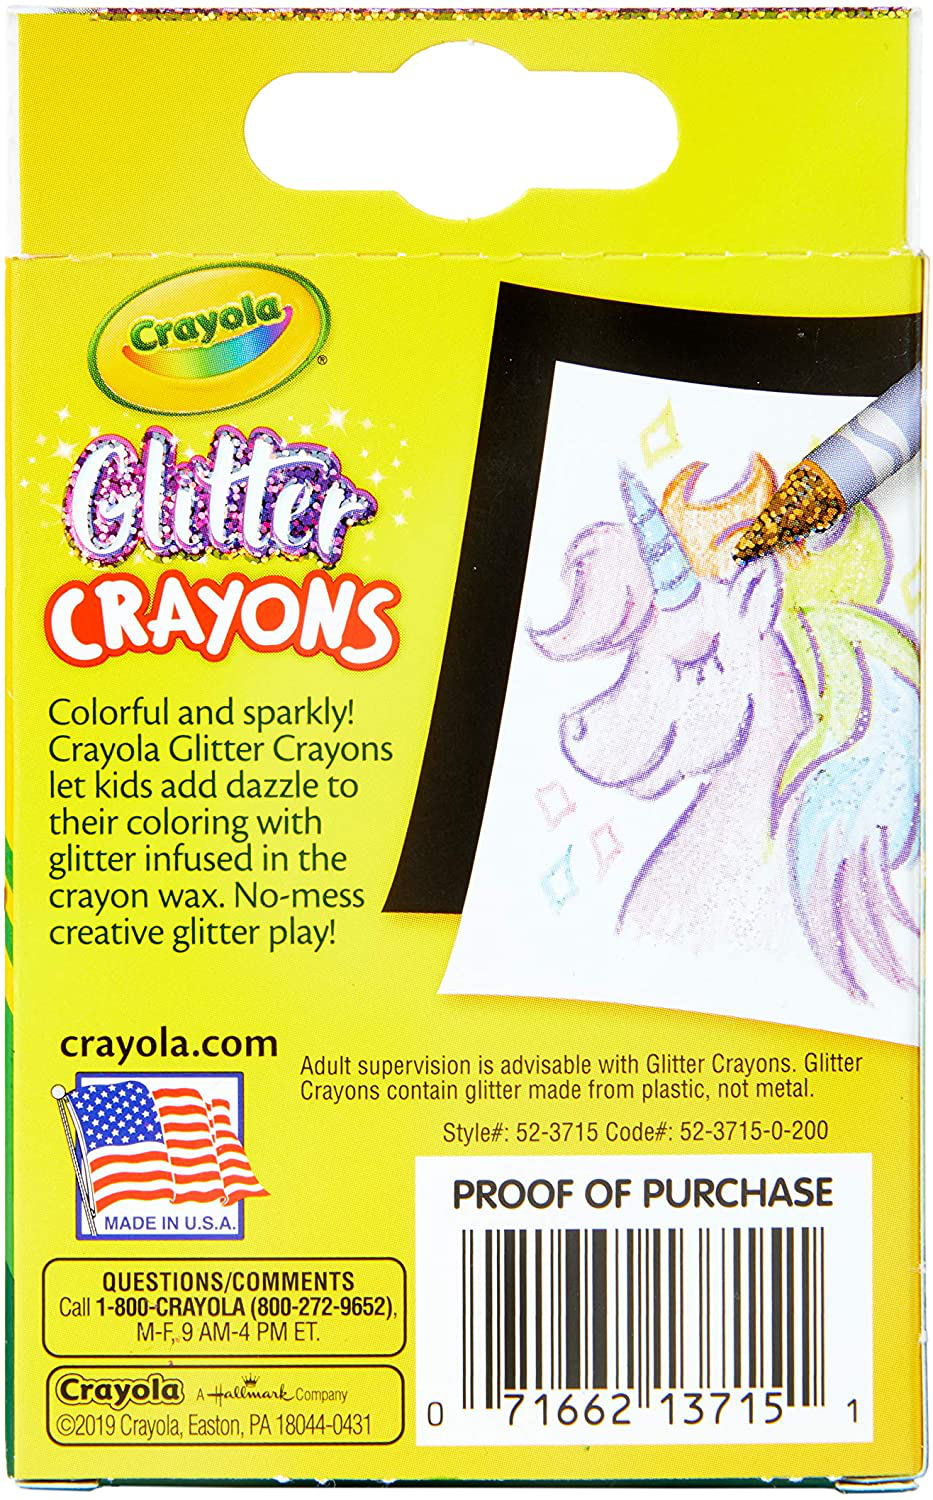 Crayola Glitter Crayons, Back To School Supplies, 24Count, Multi